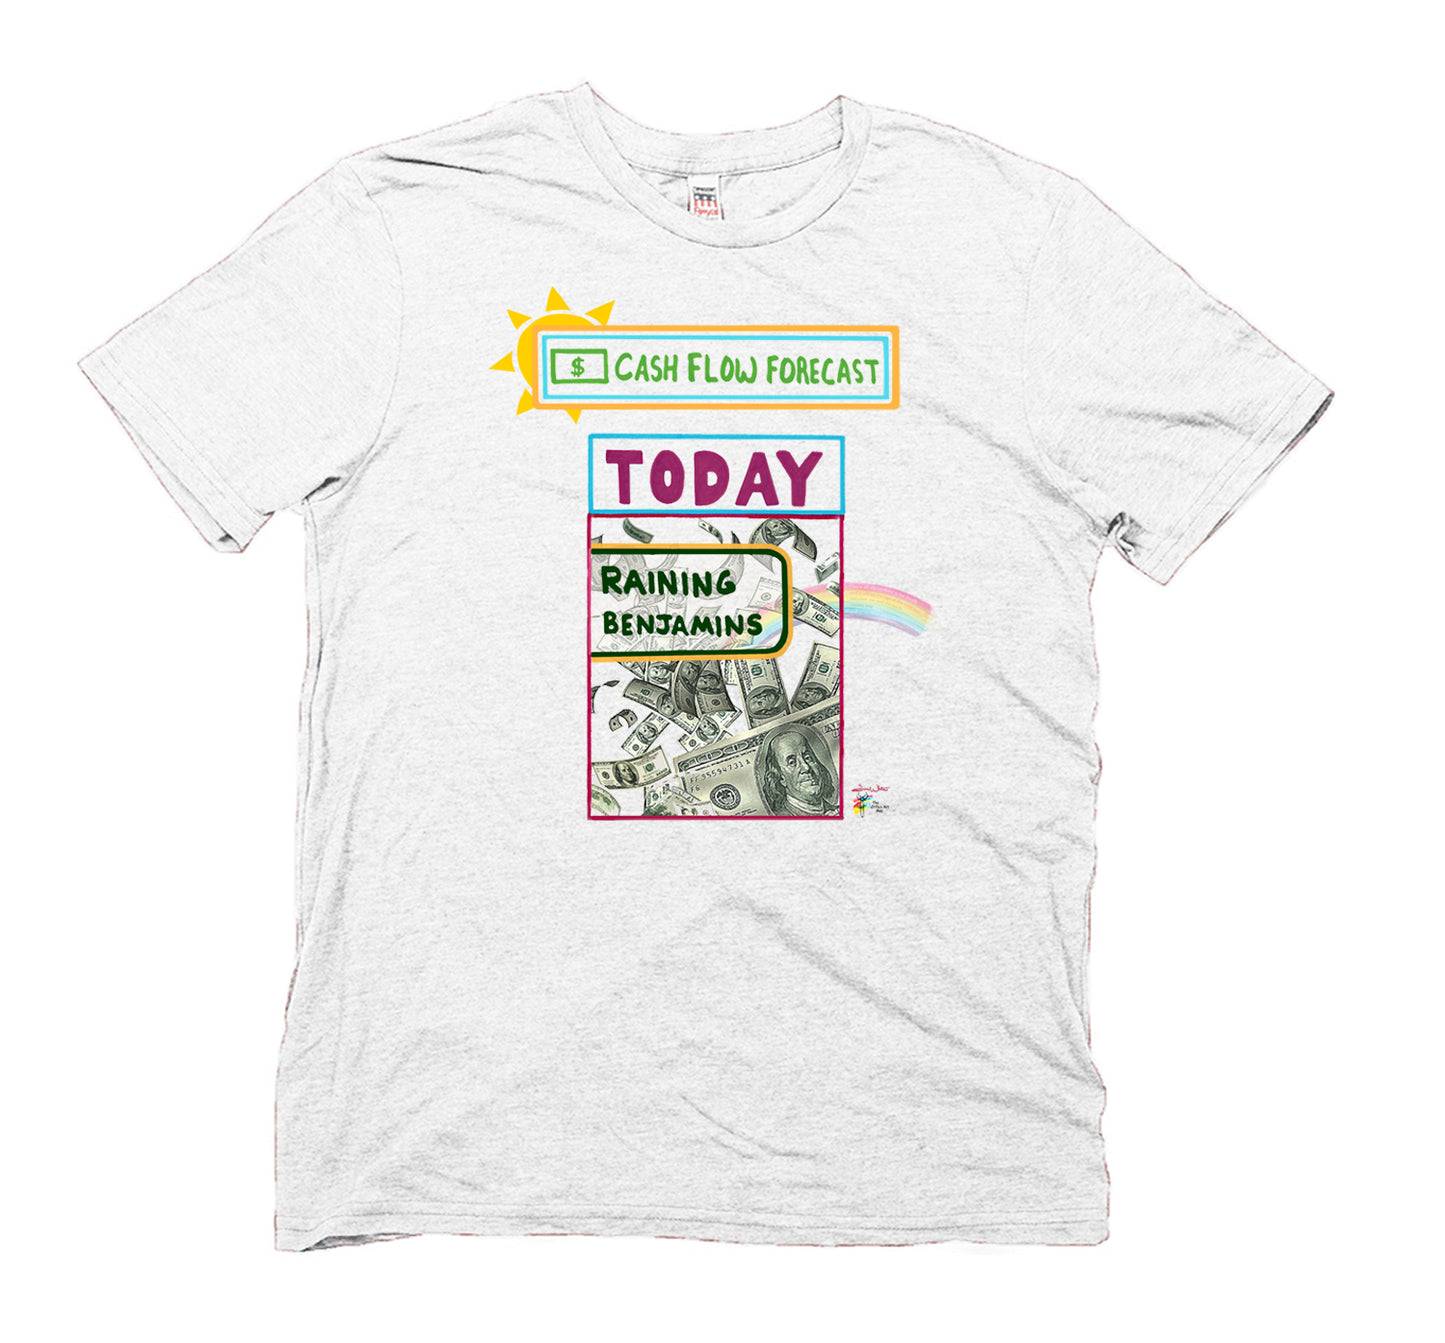 Funny Accountant T Shirt Cash Flow Forecast Raining Benjamins by The Office Art Guy